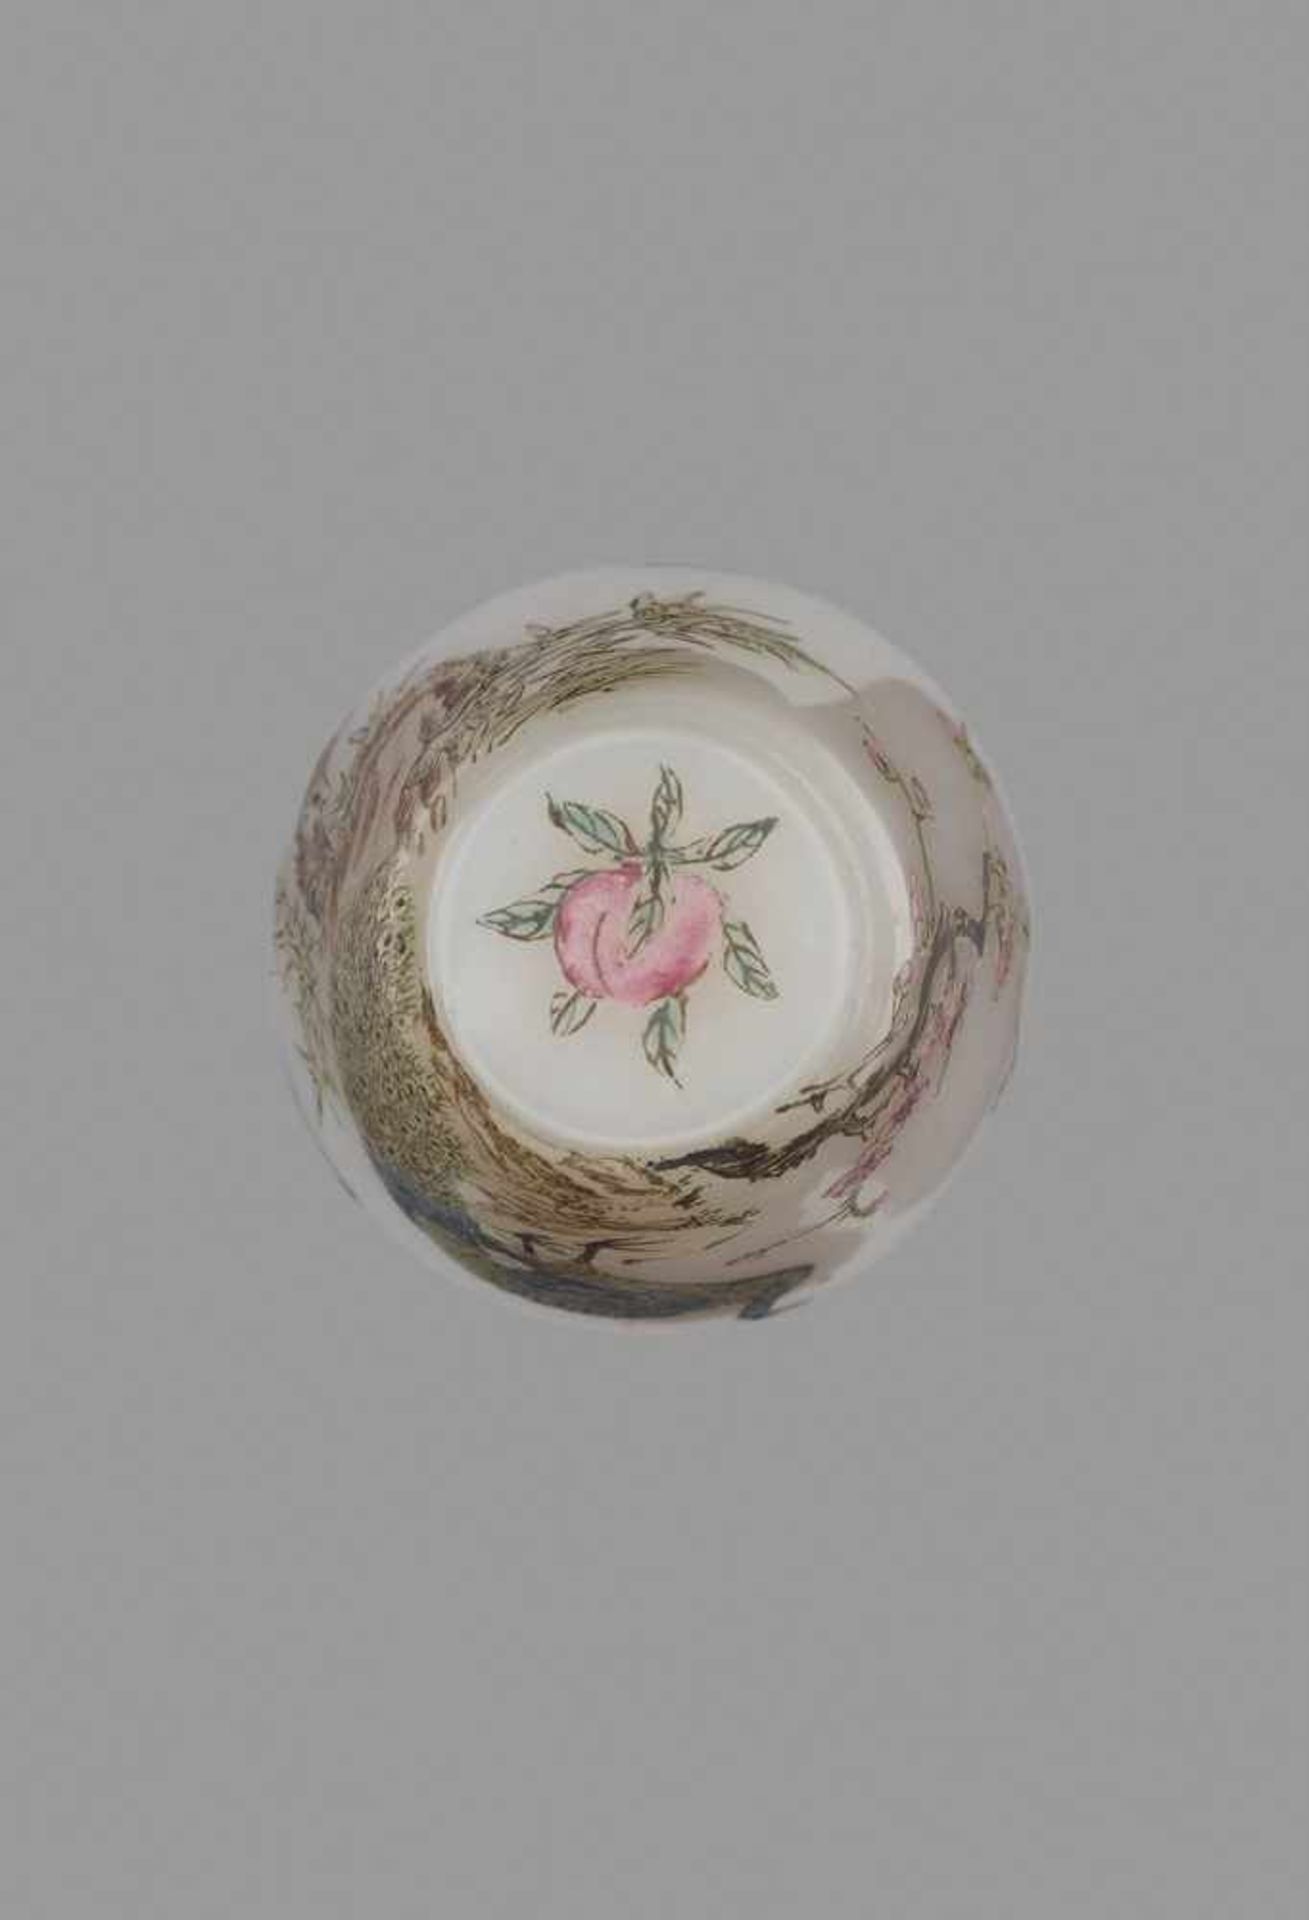 A GUYUE XUAN ‘PEACOCK’ ENAMELED GLASS SNUFF BOTTLE WITH A ‘PEACH’ MARK White opaque glass with - Image 8 of 8